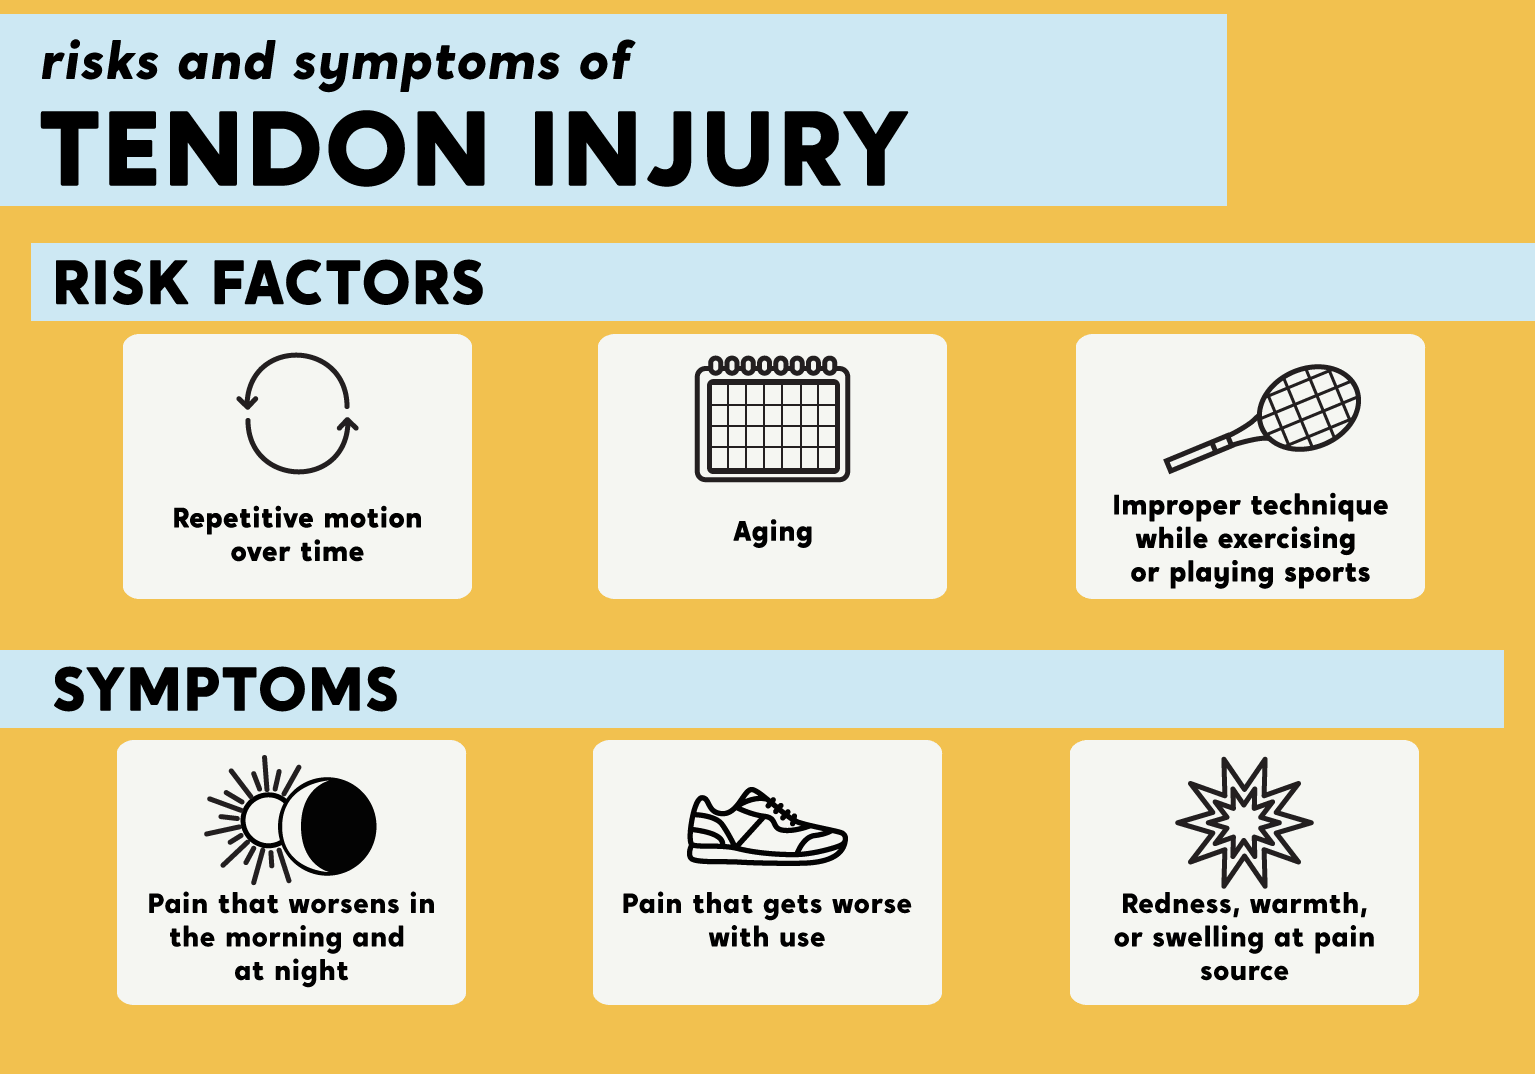 An infographic with the risk factors and symptoms of tendon injury